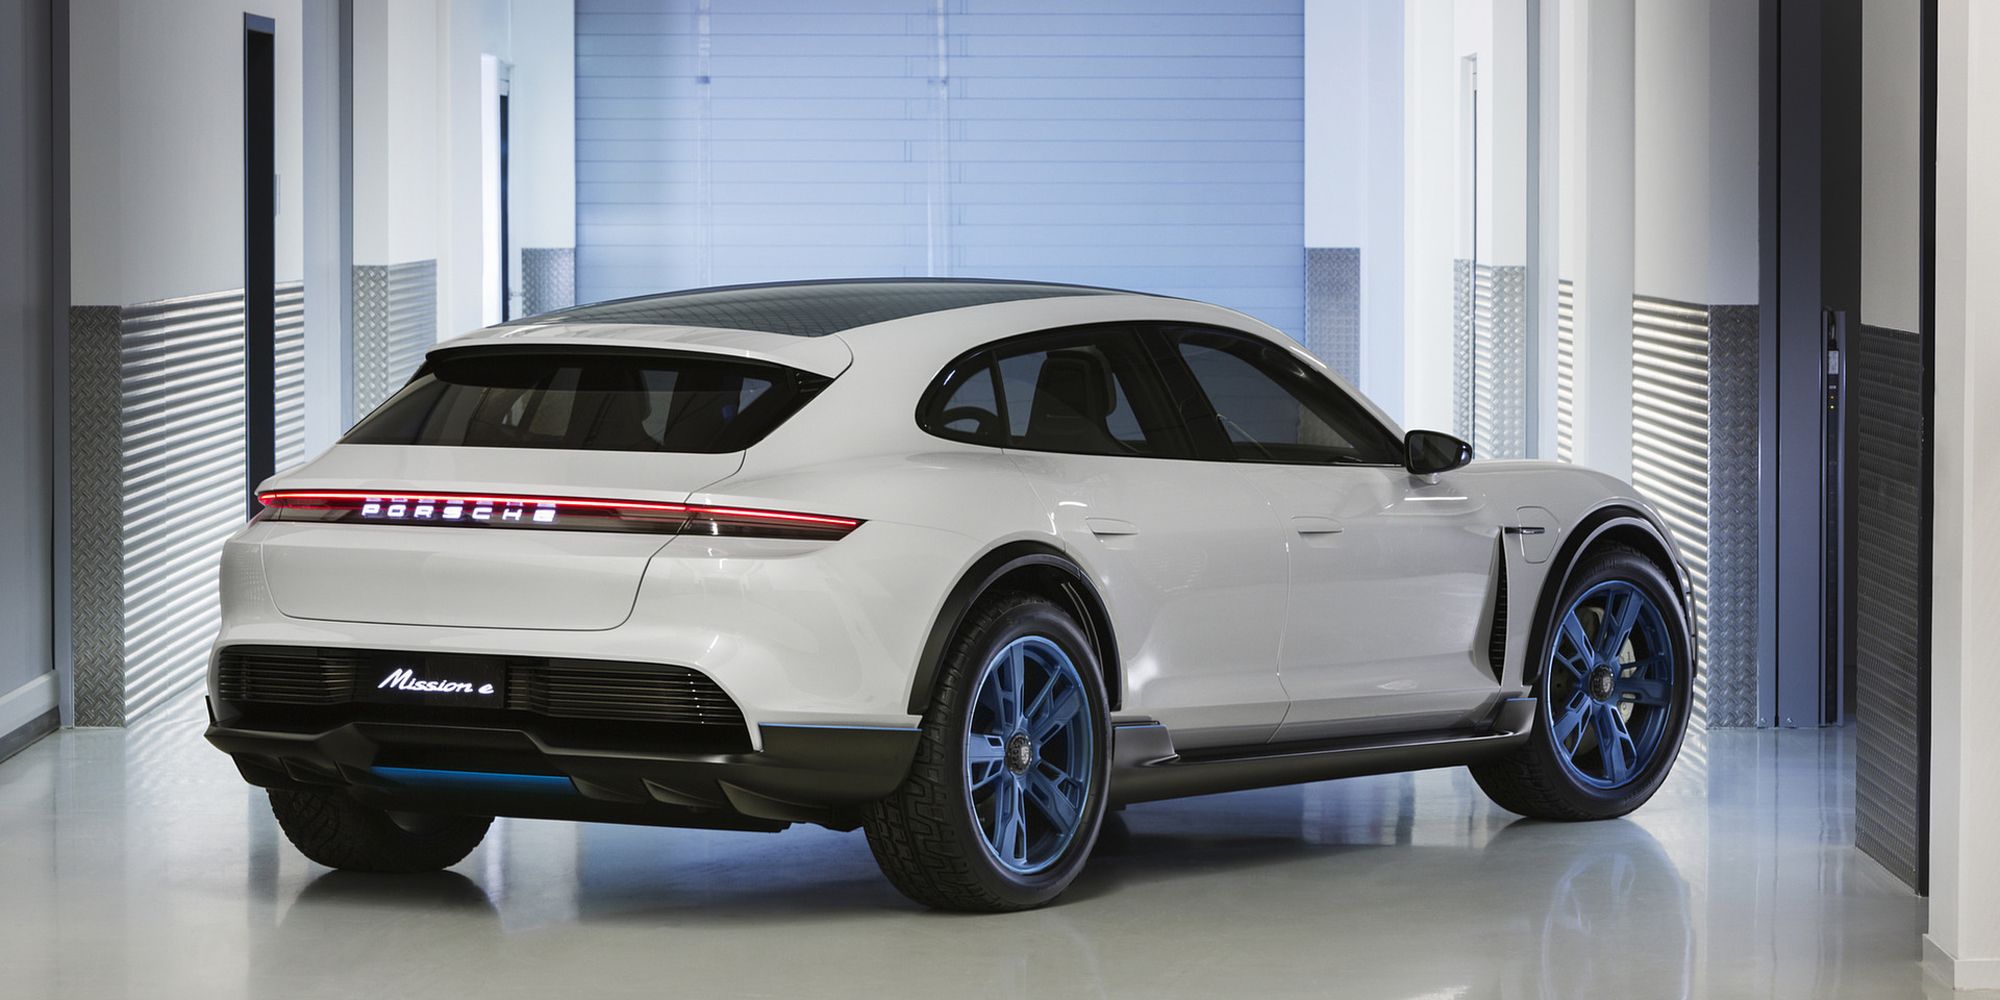 The rear of the Mission E Cross Turismo